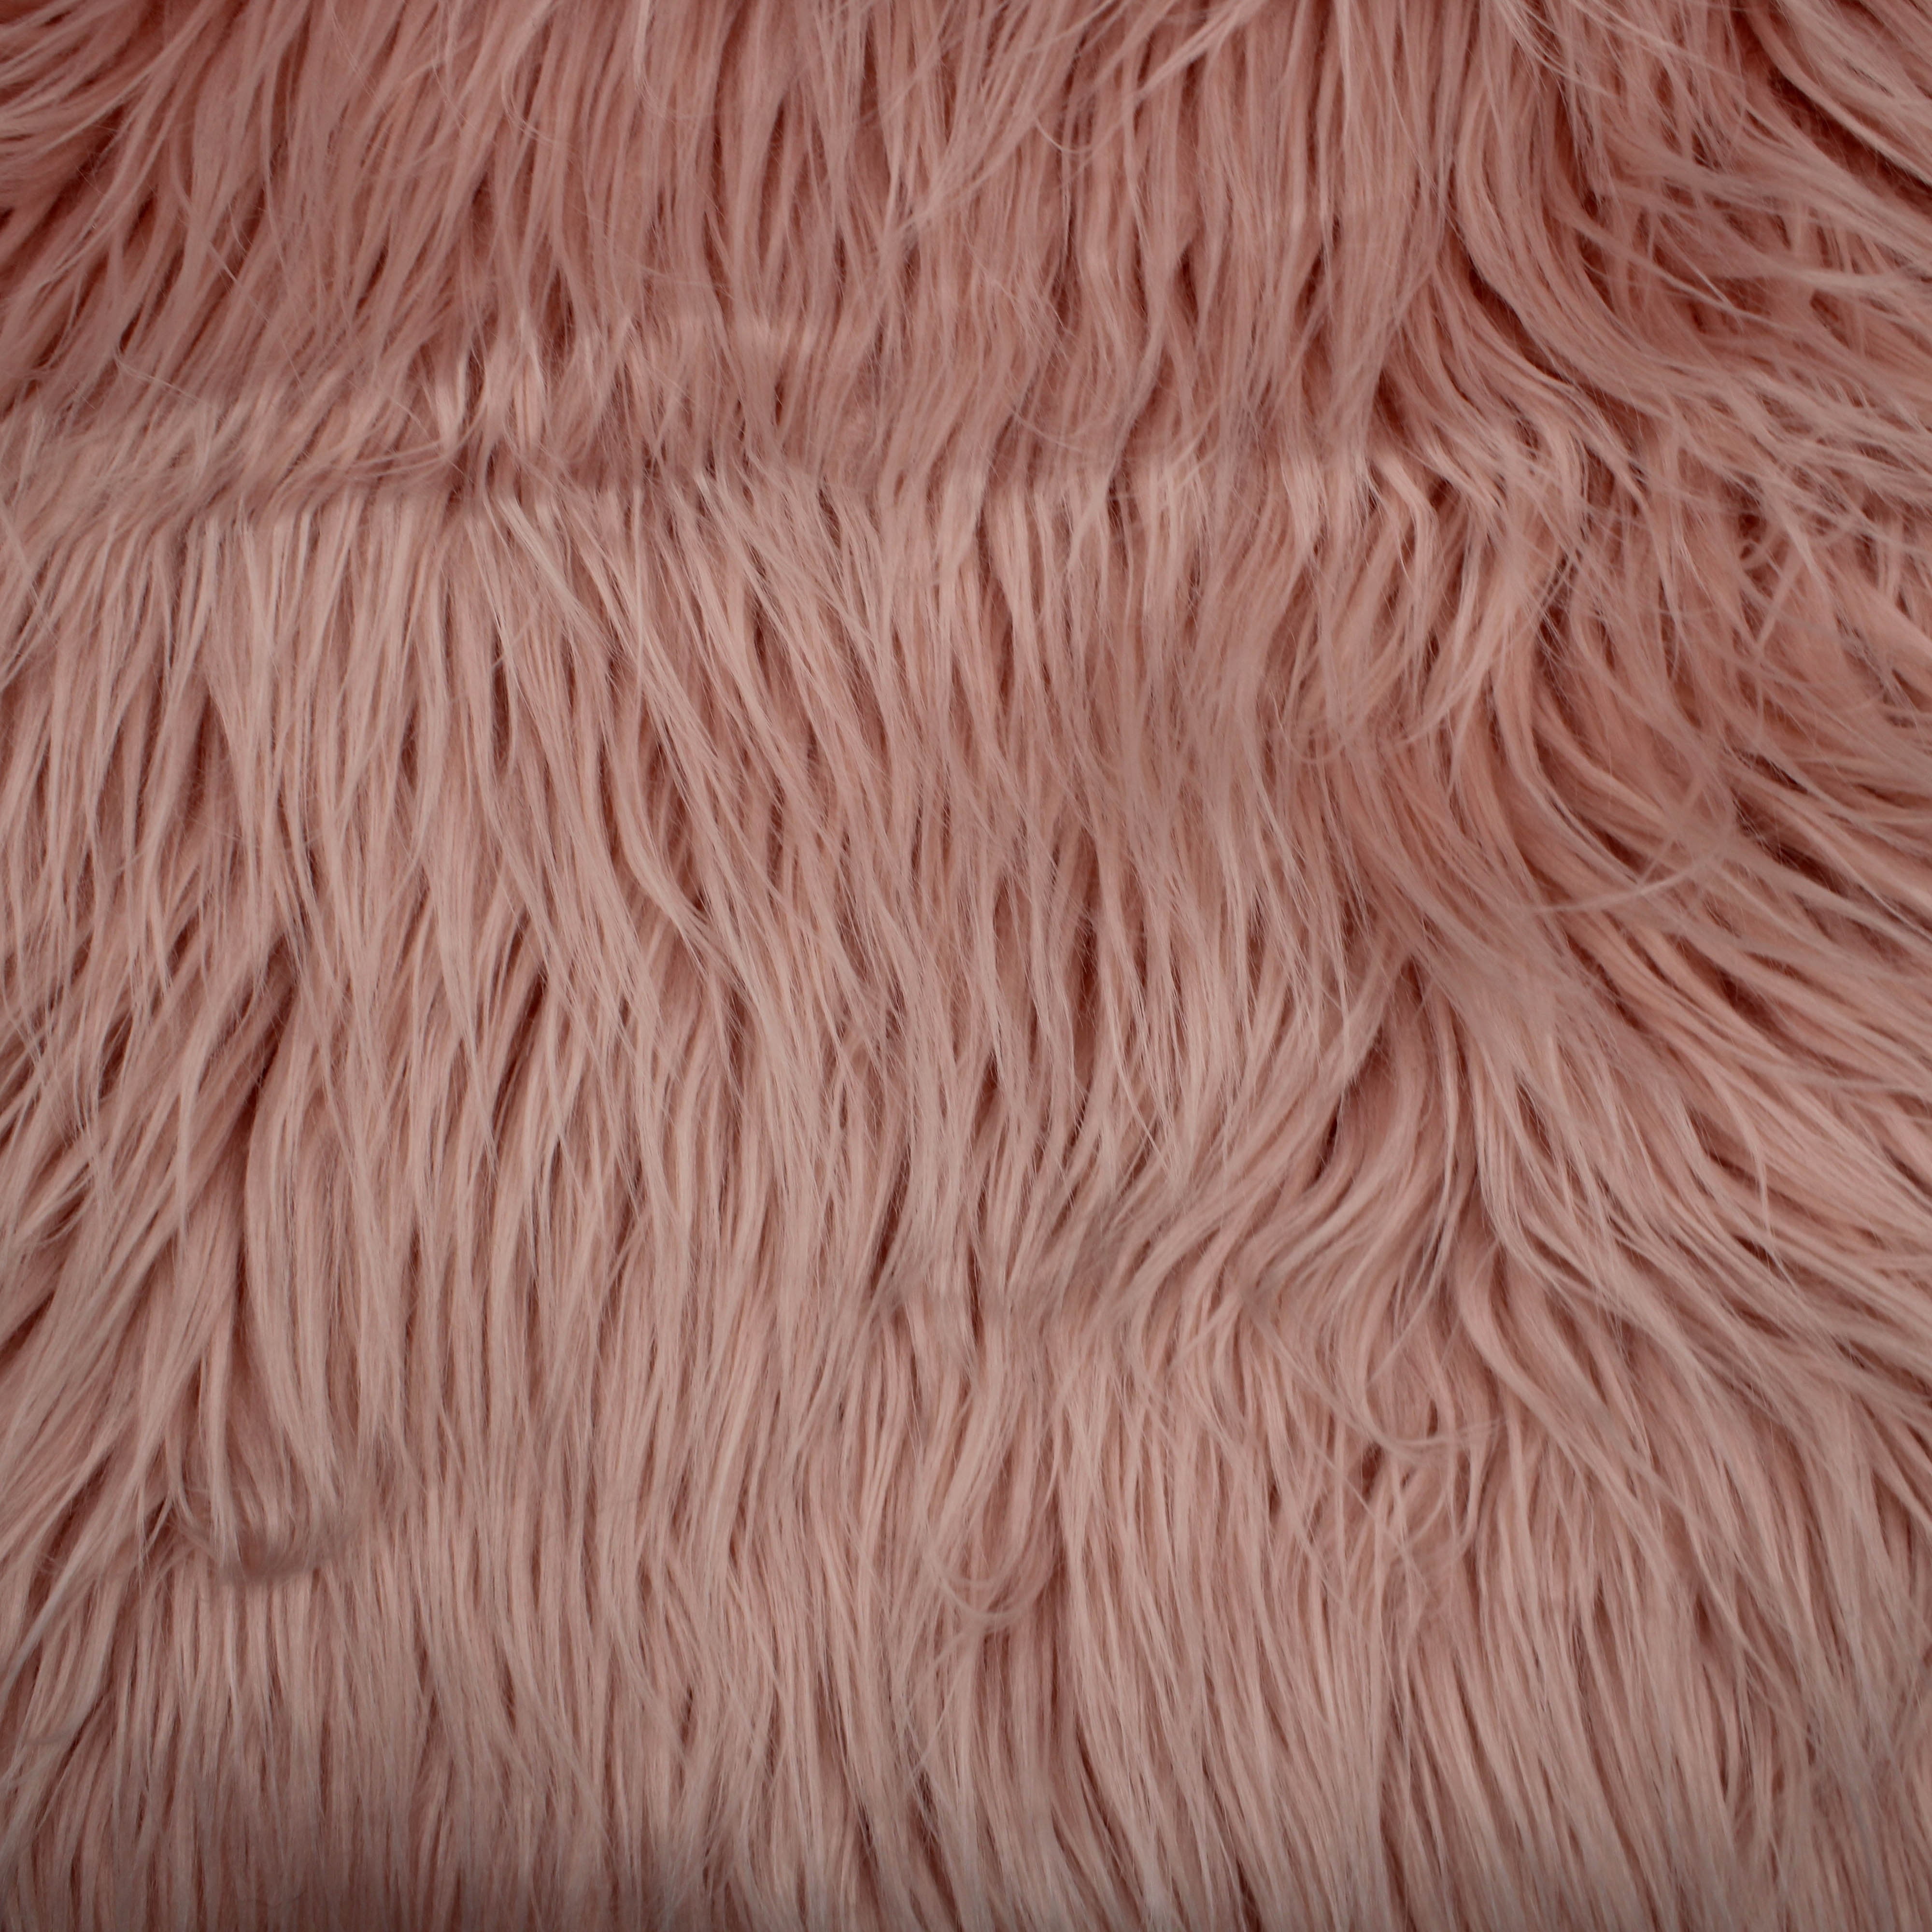 Pink Long Pile Fabric, Faux Fur Fabric, Acryllic & Polyester, Blankets  Fabric, Fabric by the yard, Plush Animals Fabric